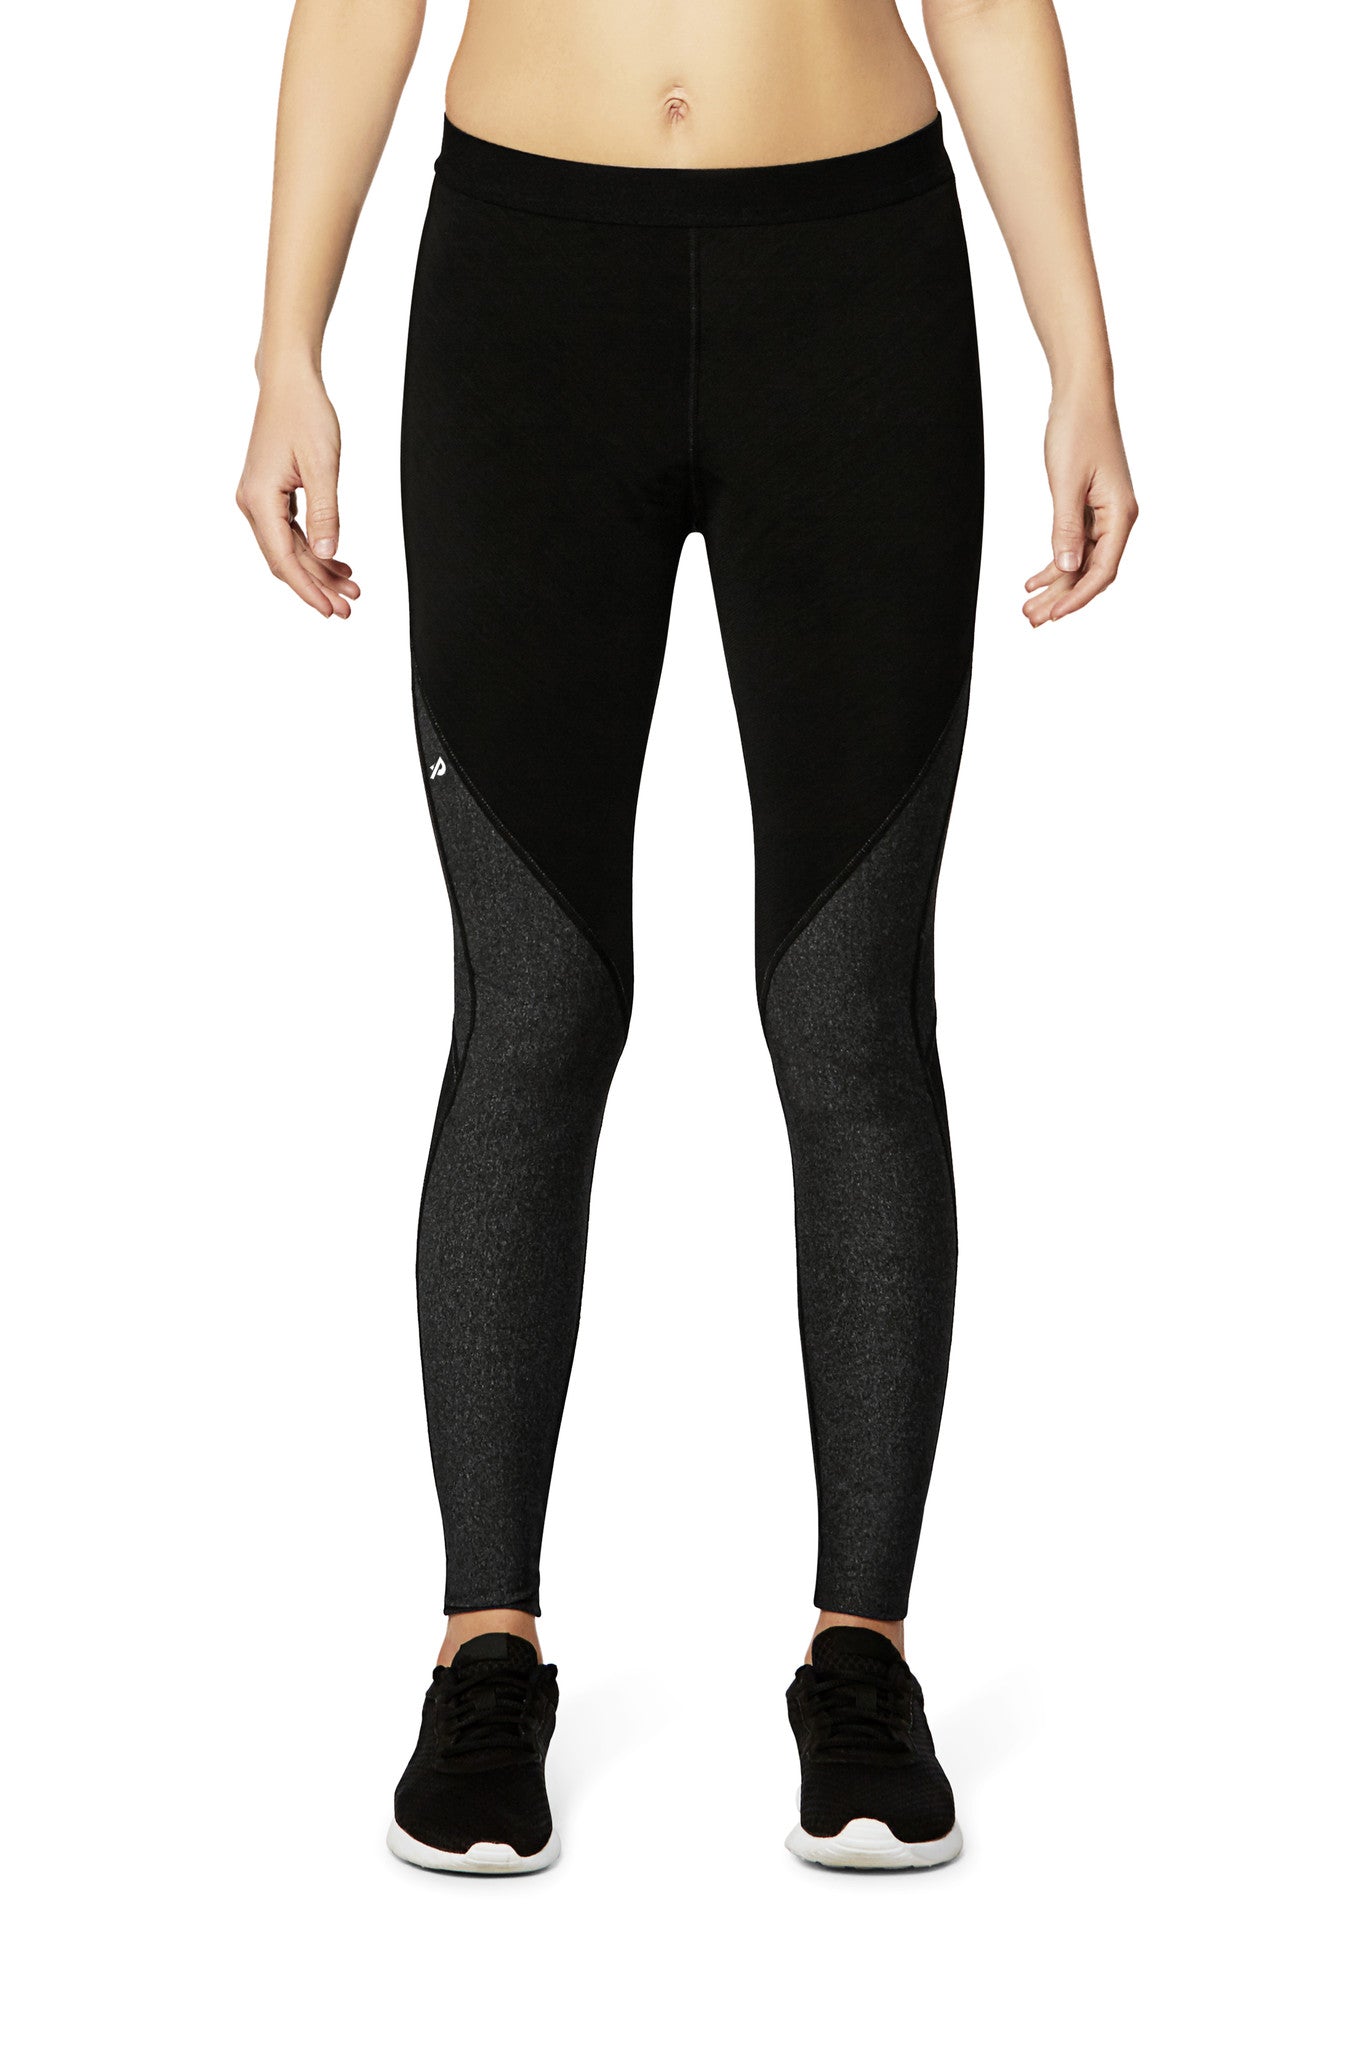 Leggings with resistence bands! Thoughts? Is this a time efficient